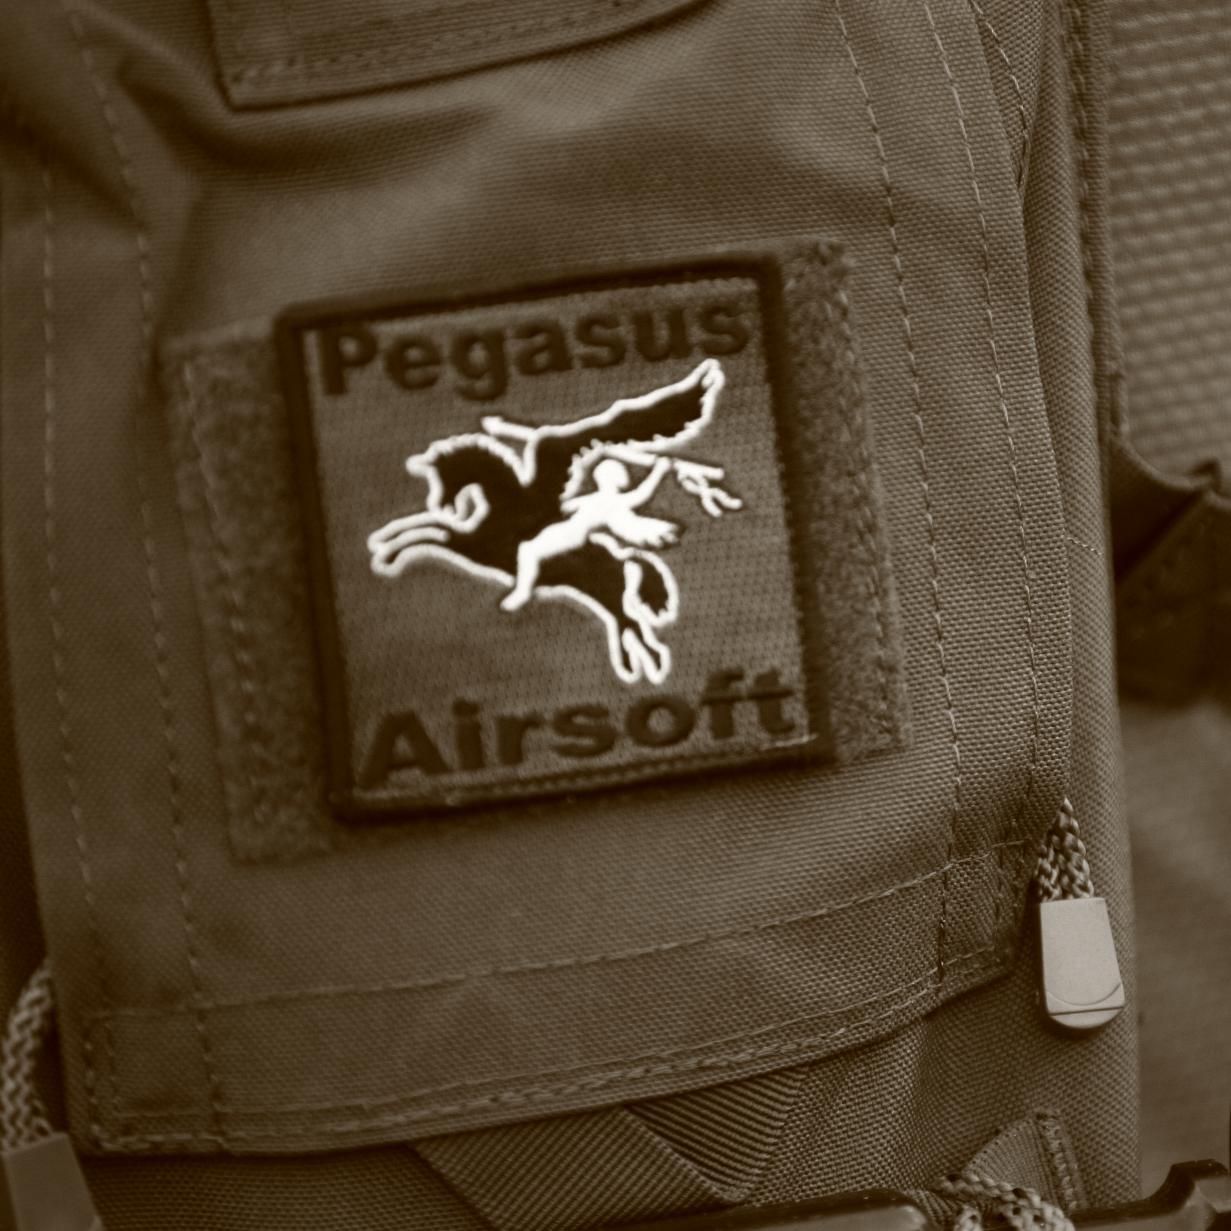 Pegasus Airsoft hosts safe, fun airsoft events in the Inland Northwest. Find us on the web at https://t.co/booRyY2utw